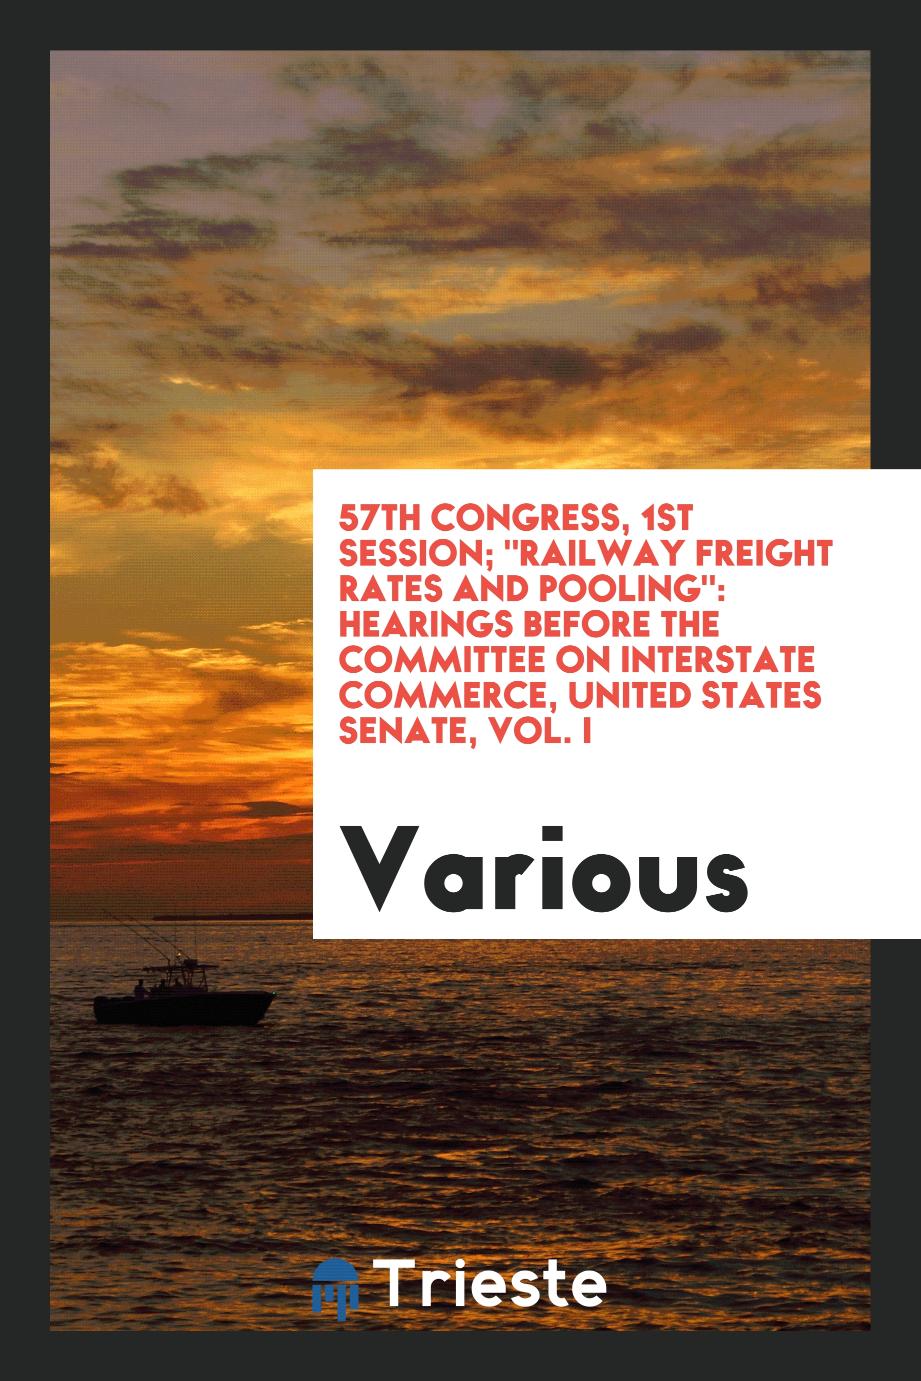 57th Congress, 1st Session; "Railway Freight Rates and Pooling": Hearings Before the Committee on Interstate Commerce, United States Senate, Vol. I